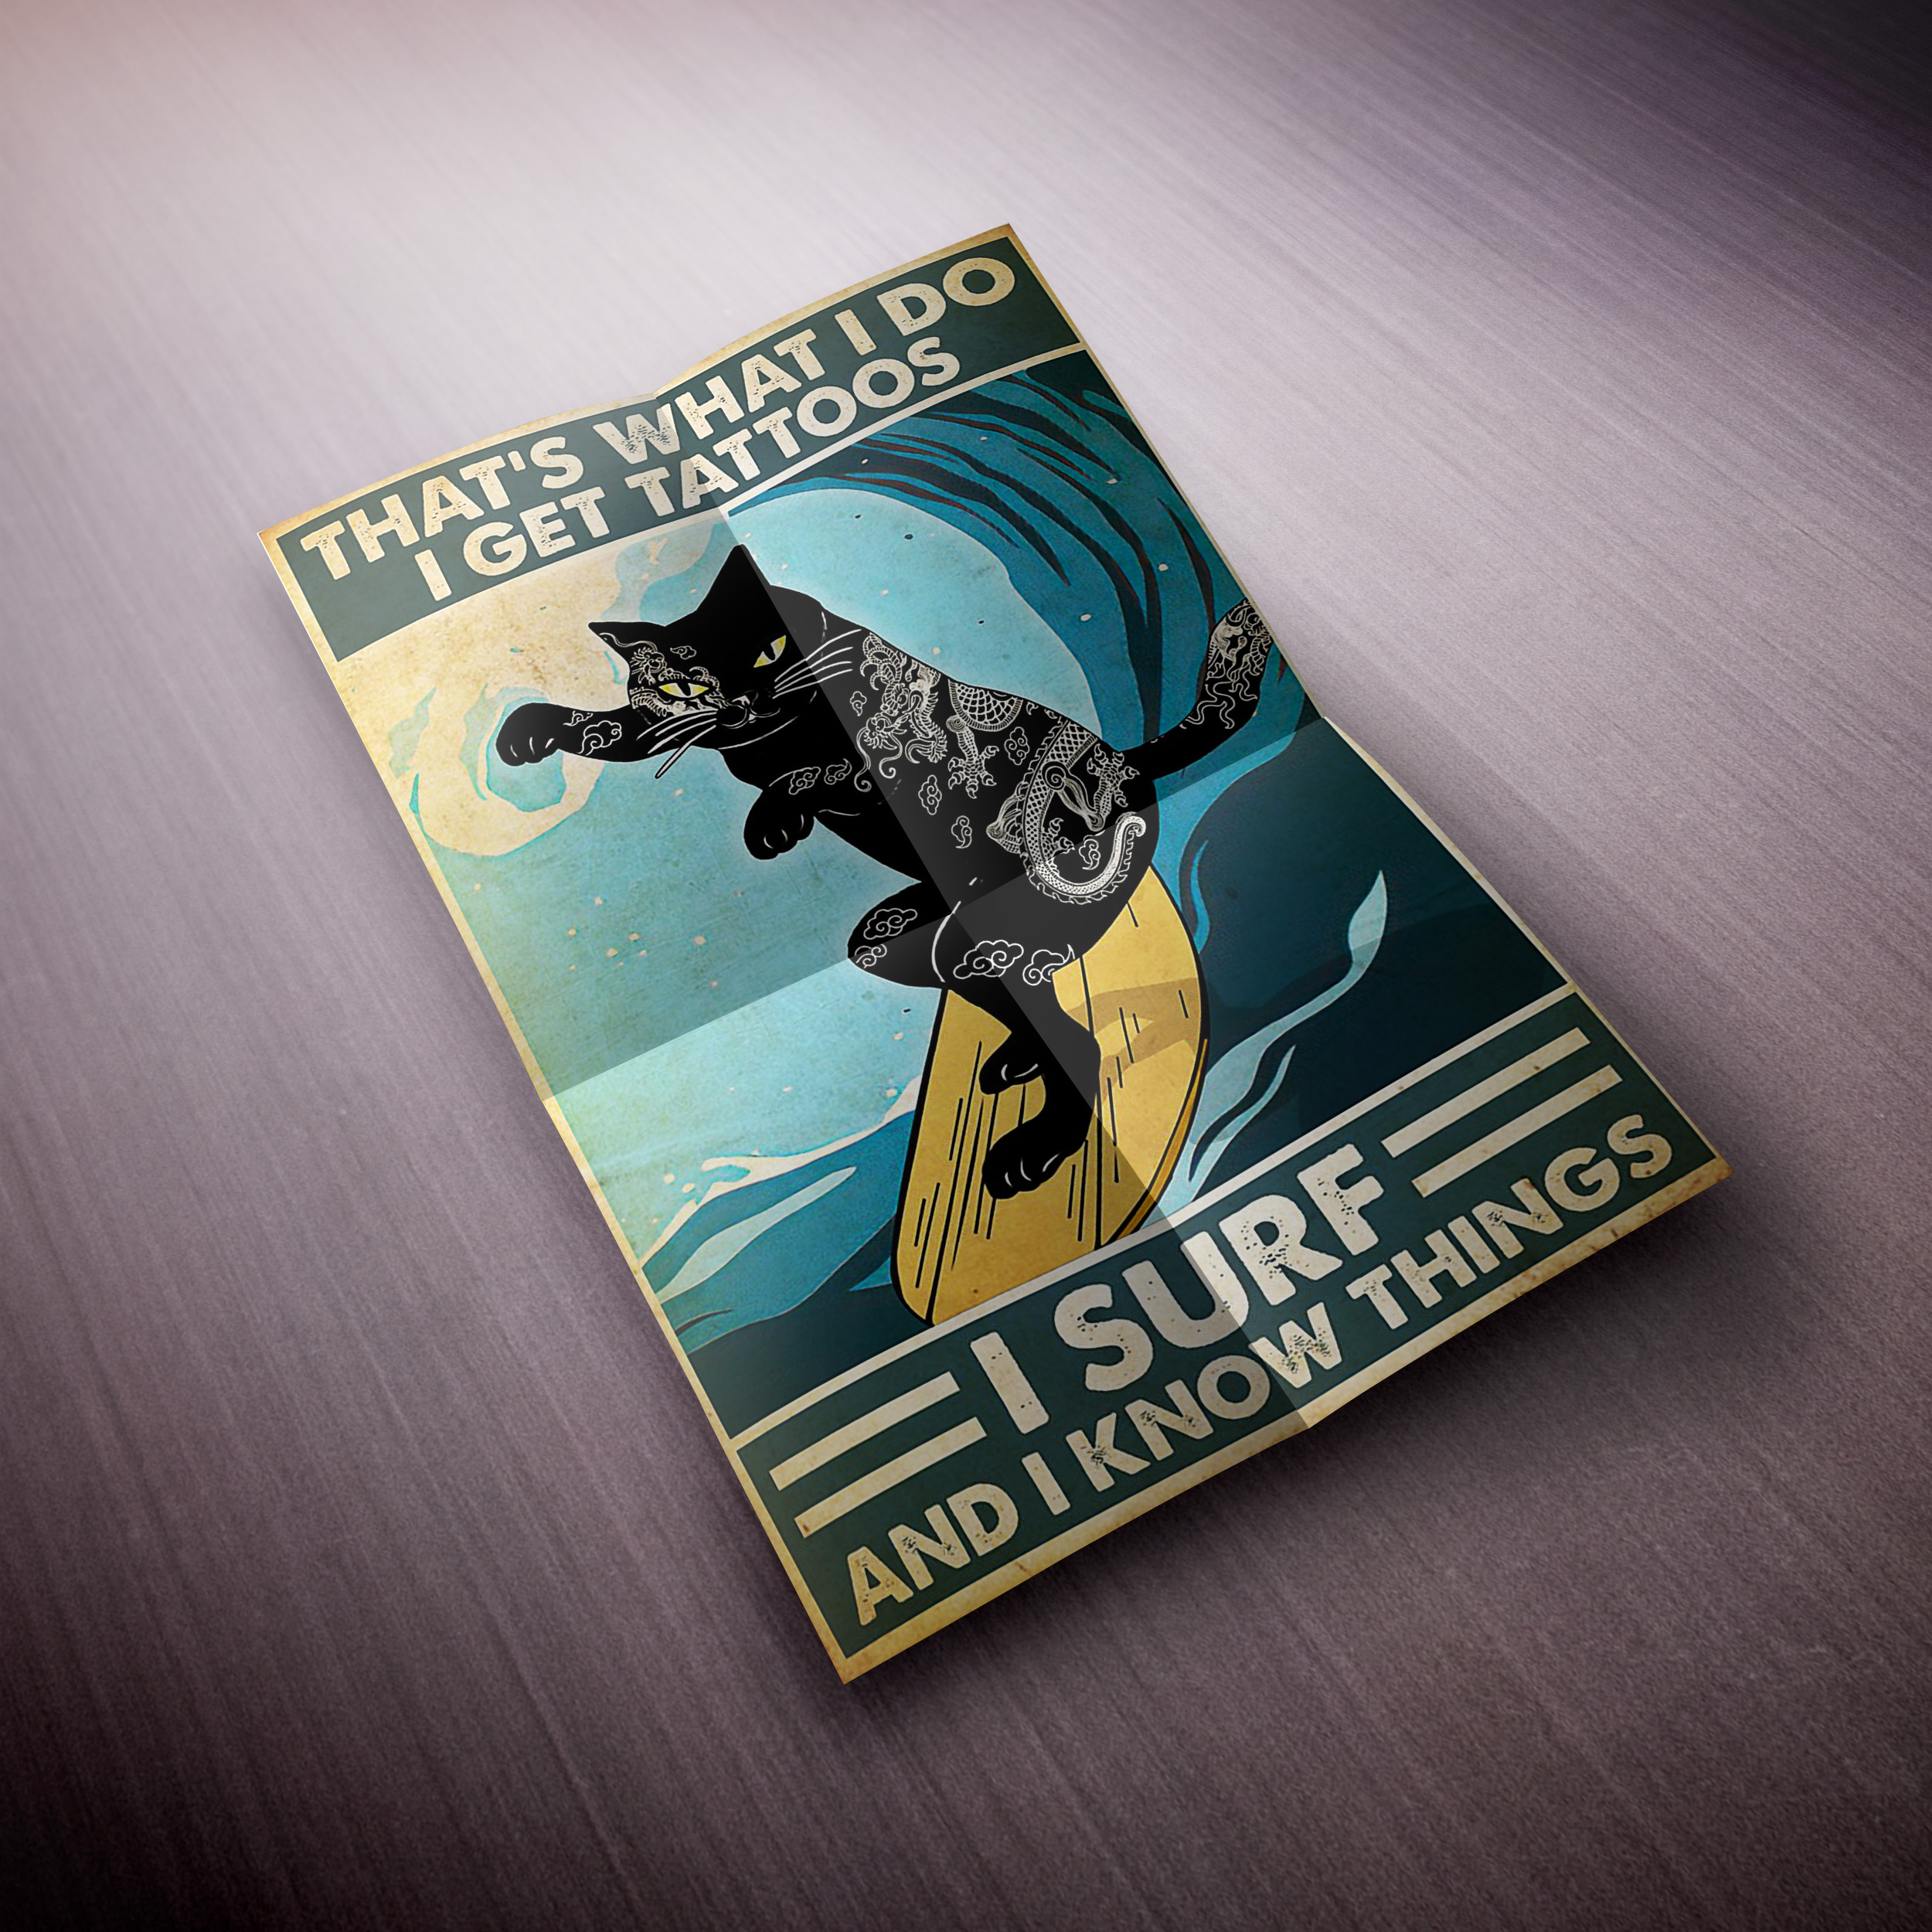 Cat surfing that’s what i do i get tattoos poster – HHS